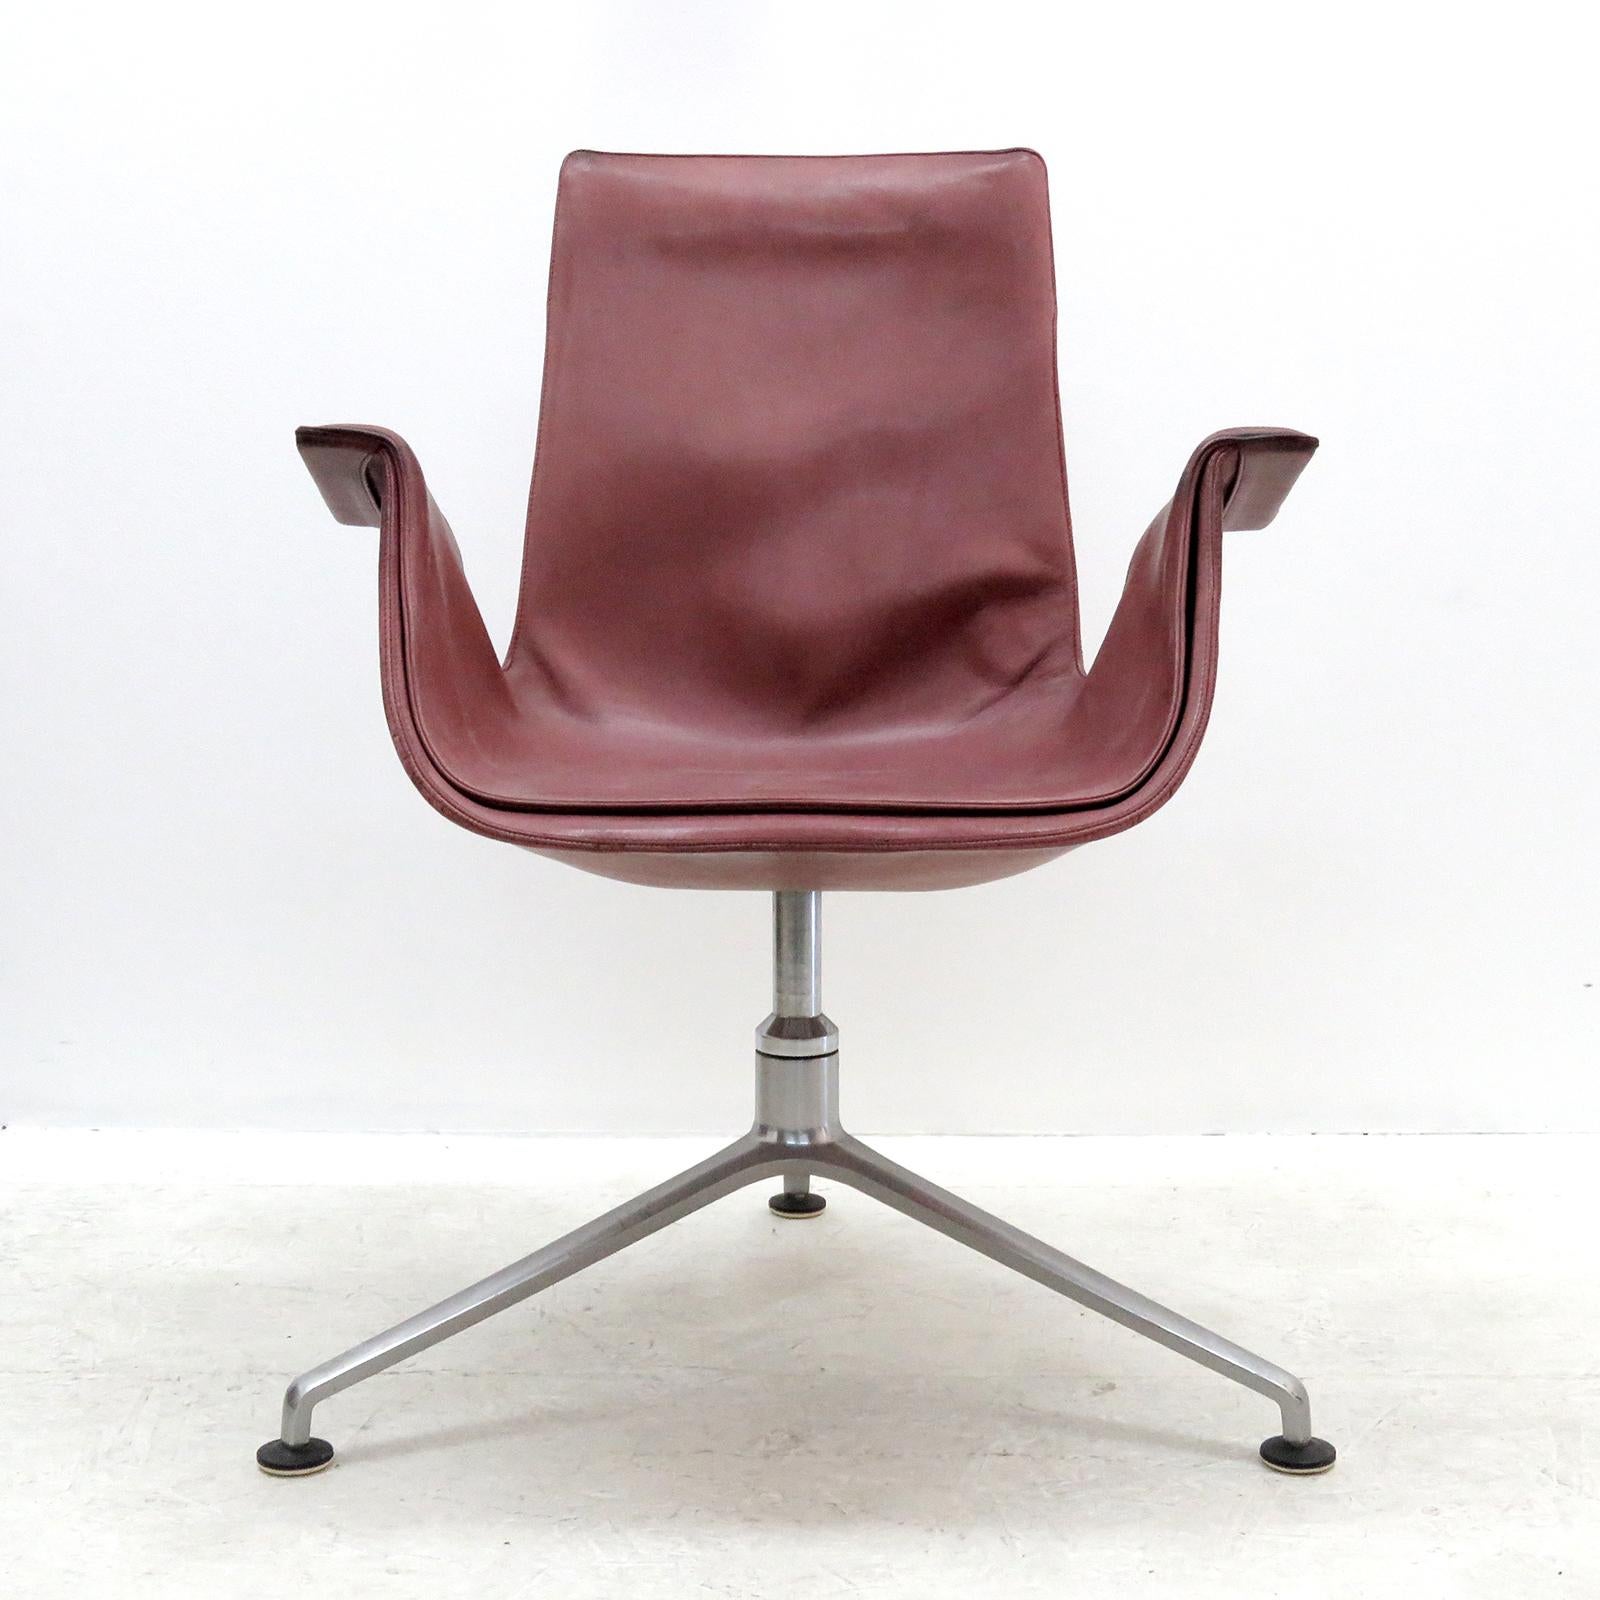 Stunning Preben Fabricius & Jørgen Kastholm early production 'Bird' chairs in beautifully aged original cordovan/rose leather with early three star base. Priced individually.